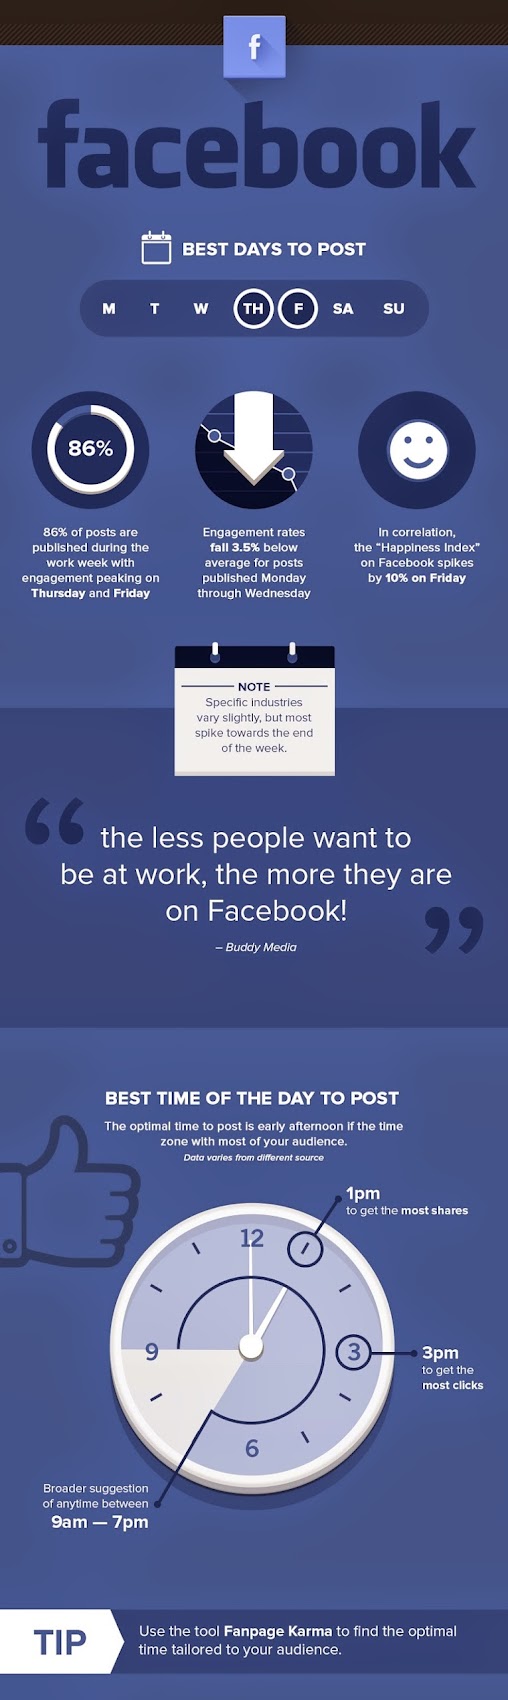 1. What's the best time to post on Facebook?